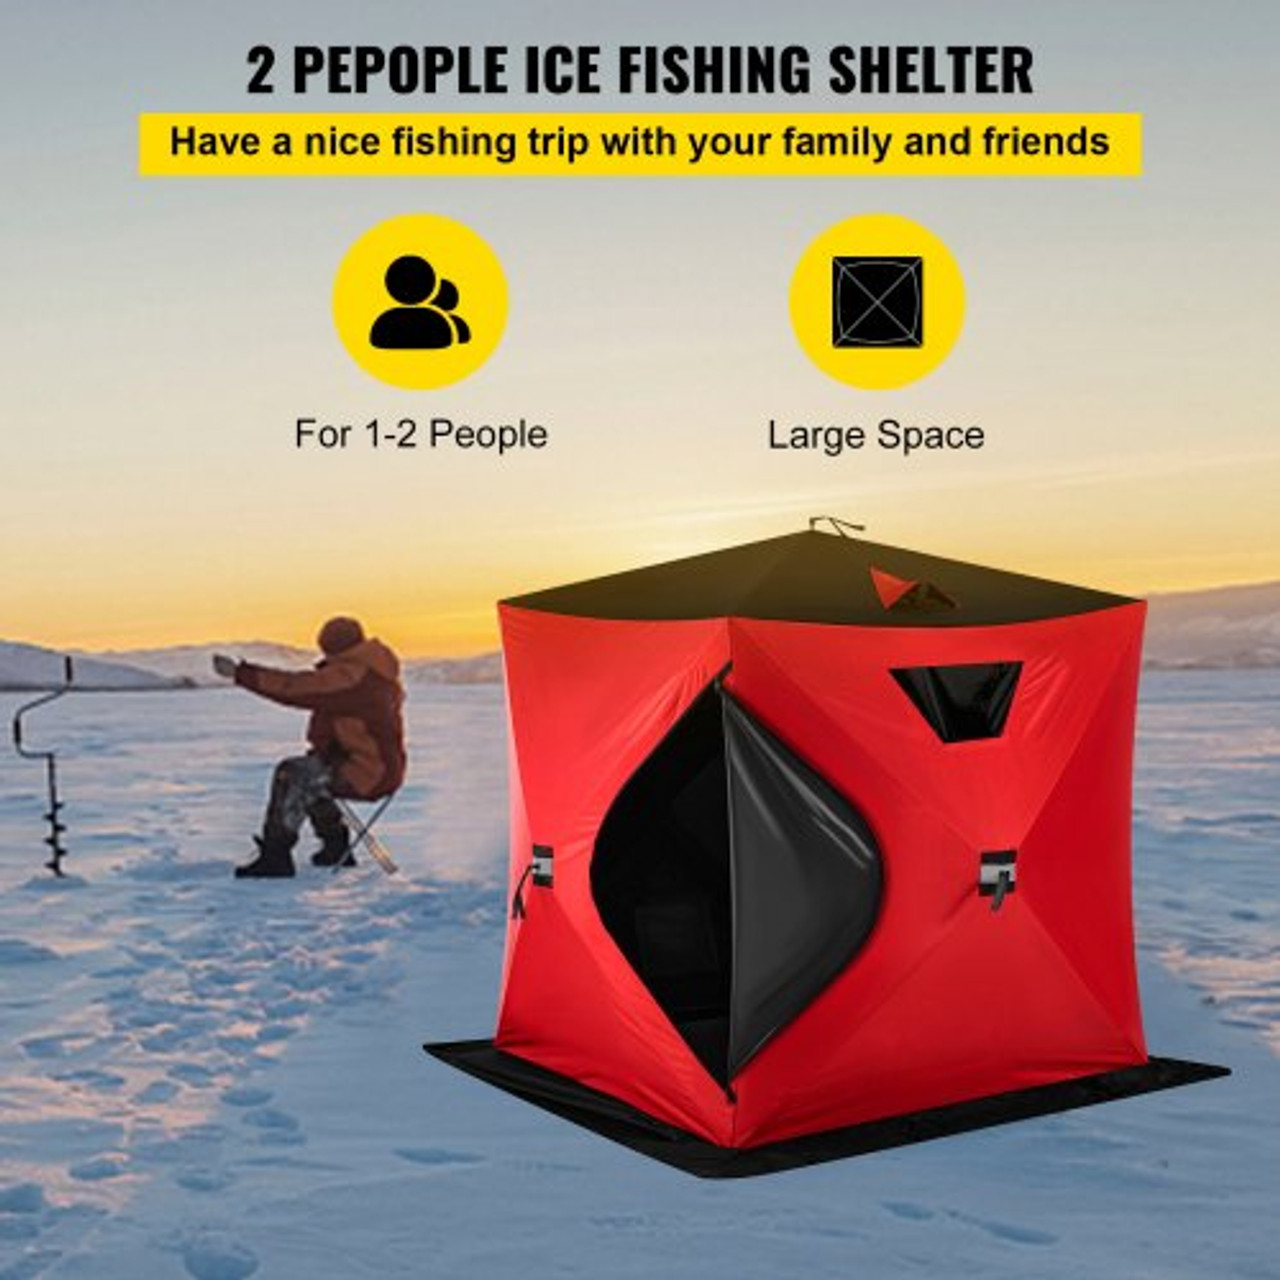 Winter Ice Fishing Tents For 3-4 People, 3 Layers Of Thickening